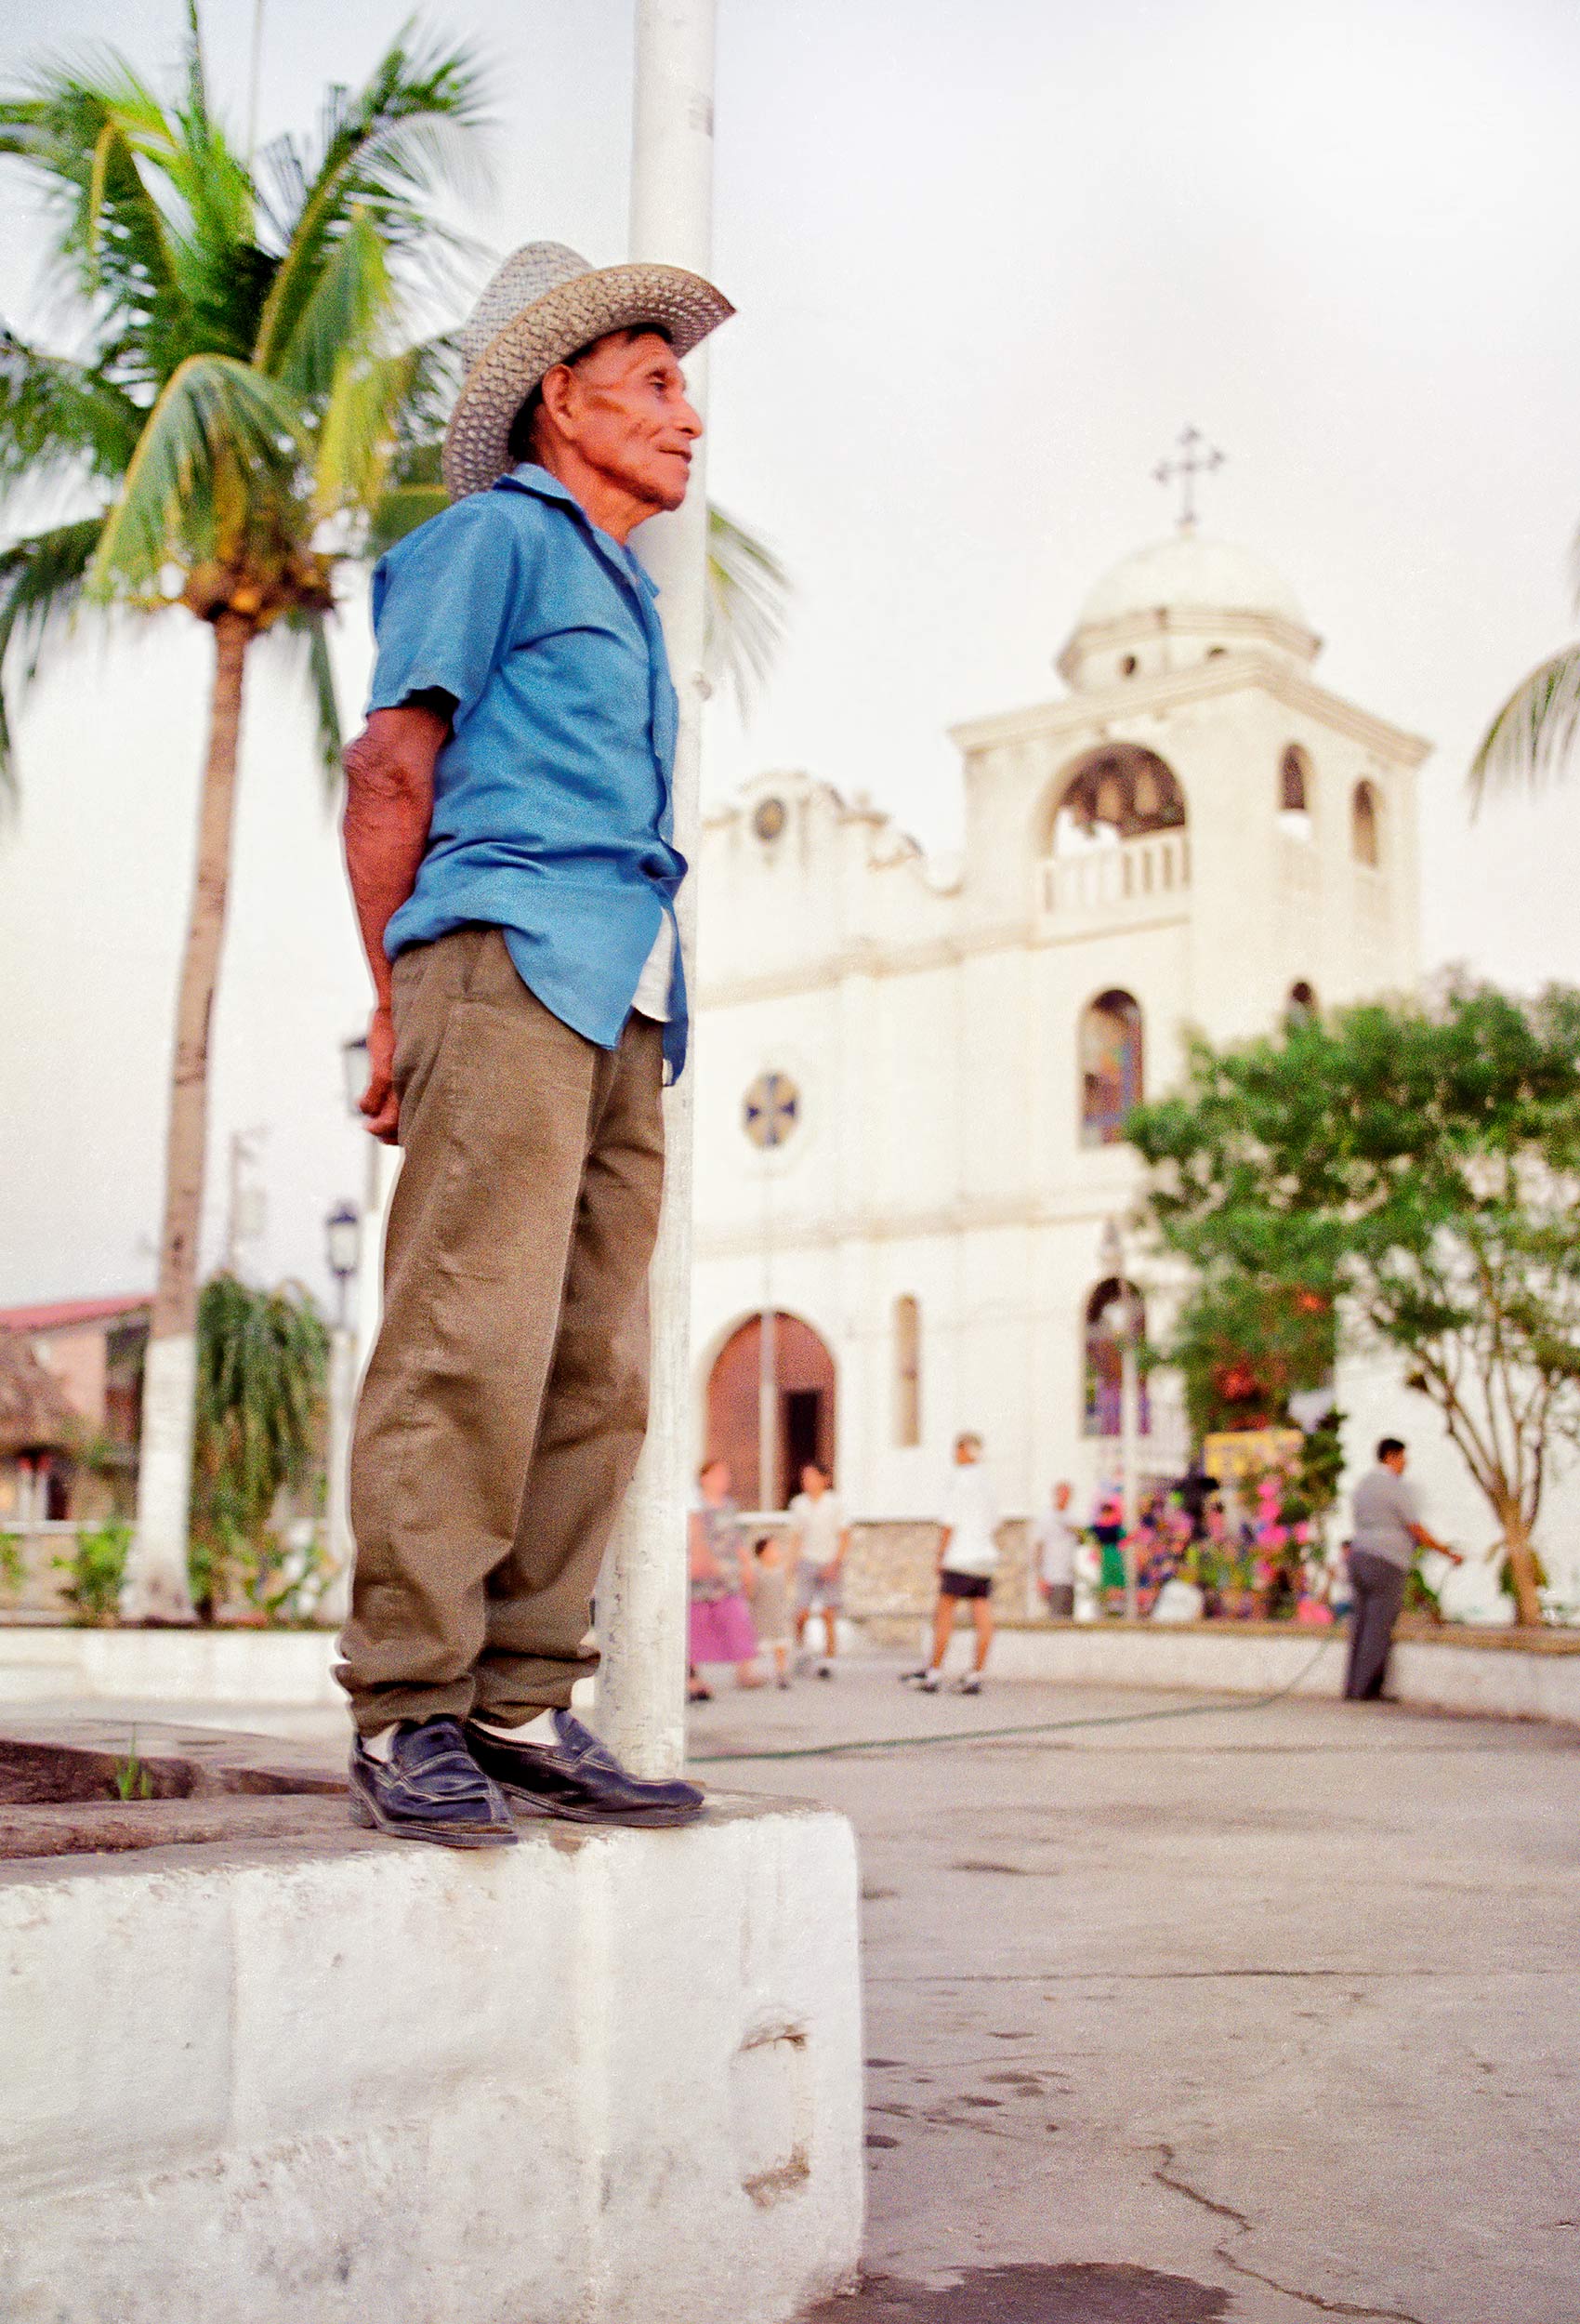 a-man-stands-near-a-church-at-sunset-in-flores-guatemala